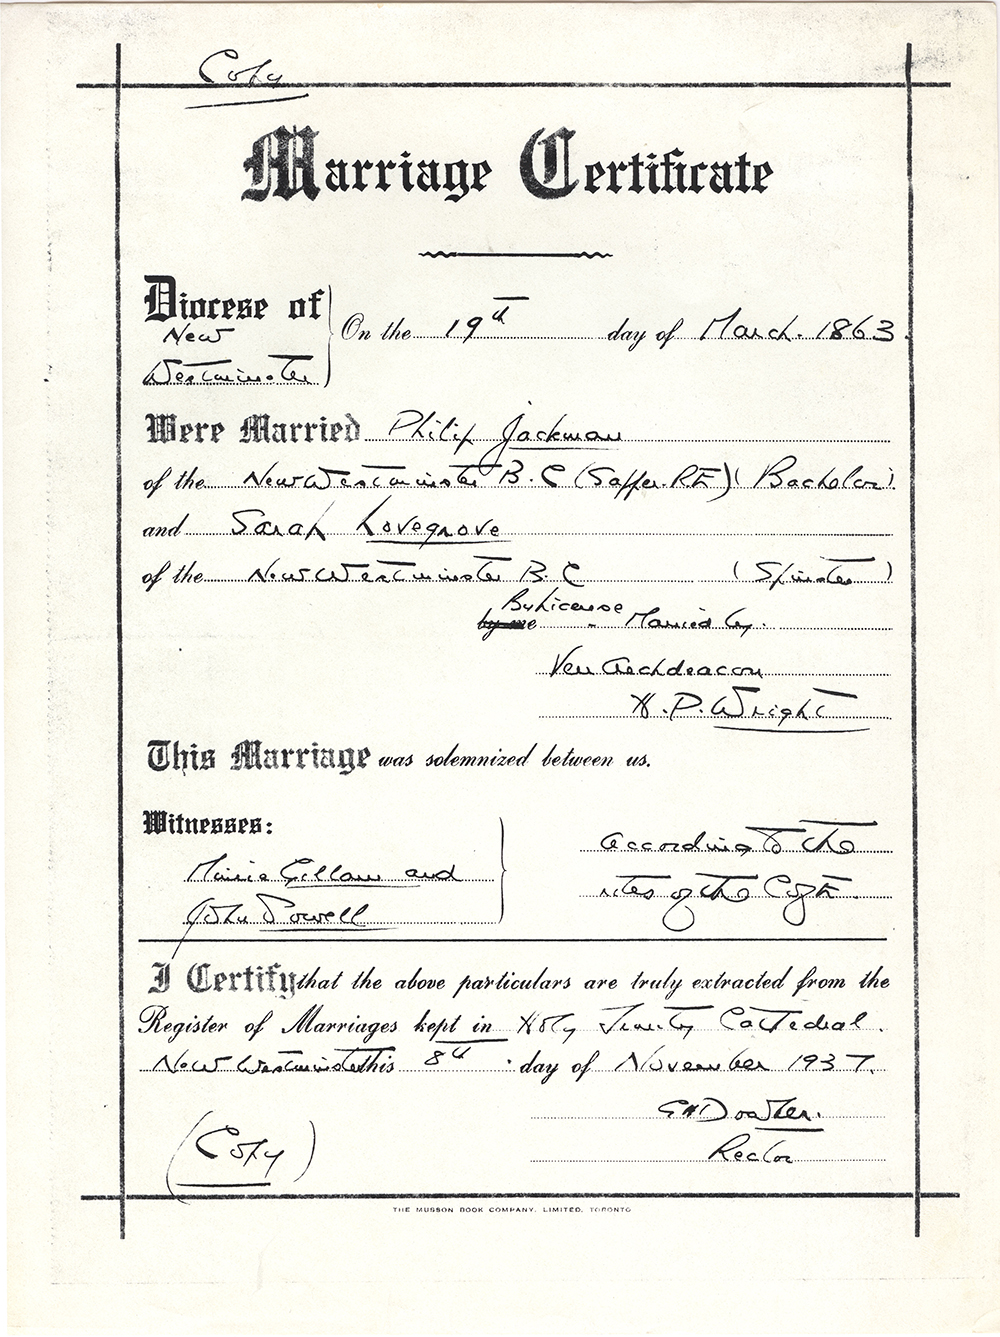 A marriage certificate facsimile for Philip Jackman and Sarah Ann Lovegrove, which was drafted in New Westminster, British Columbia. The certificate notes the date, location, officiant, and witnesses from the wedding ceremony.